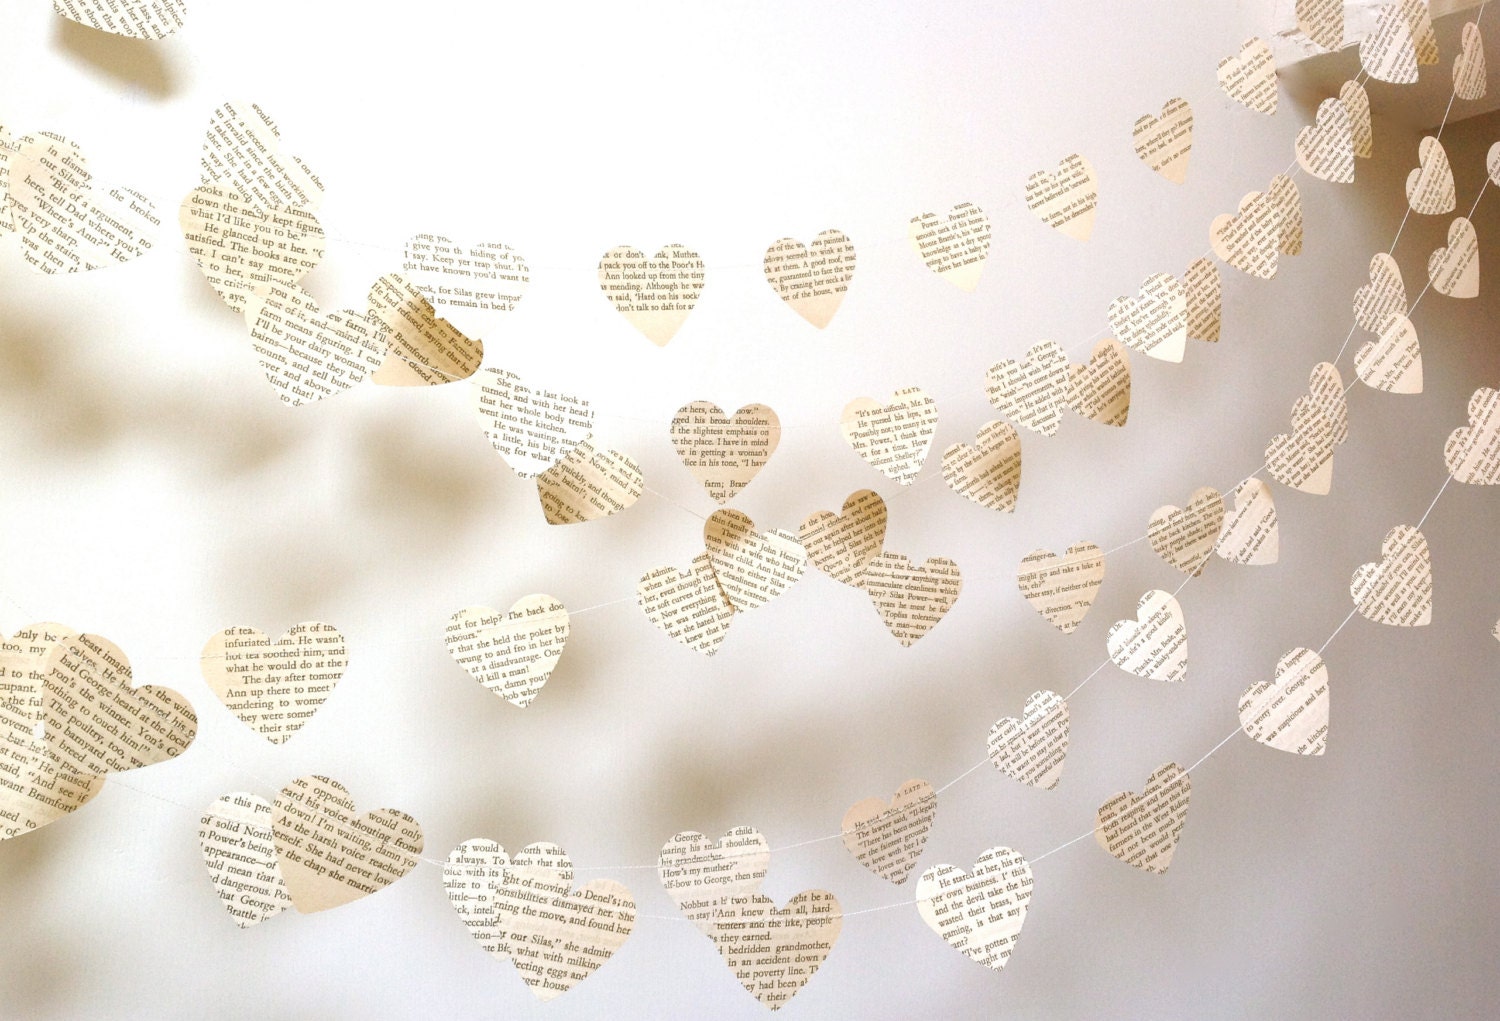 100 Small Paper Hearts, Die Cut Heart, Die Cut Paper Hearts, Heart Garland,  Small Hearts, Wedding Confetti, Pink Heart Shaped, Paper Garland -   Israel